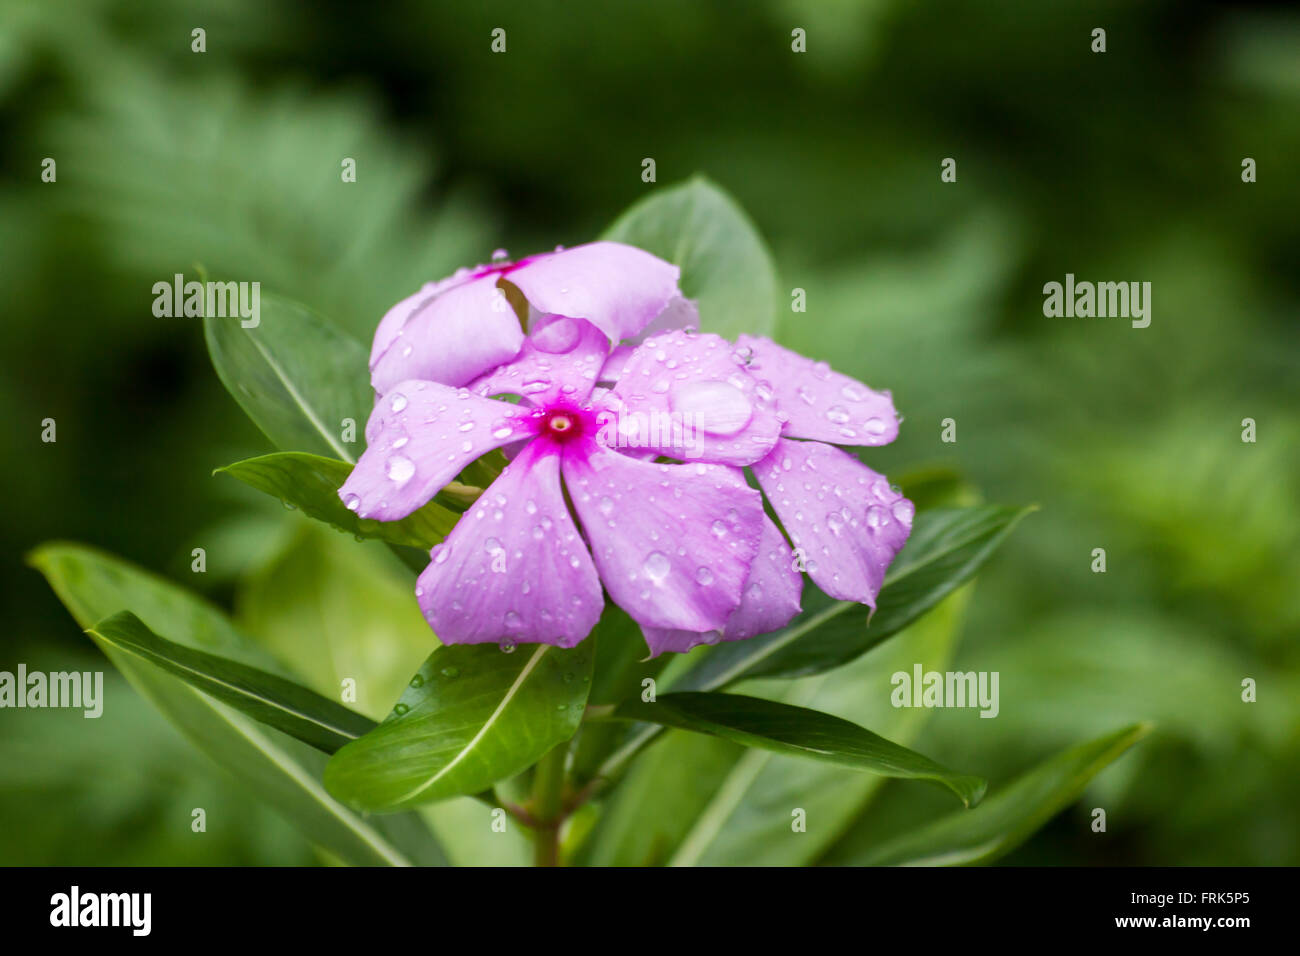 Droplet on pink periwinkle flower against a natural background,Catharanthus roseus G. Don. Stock Photo